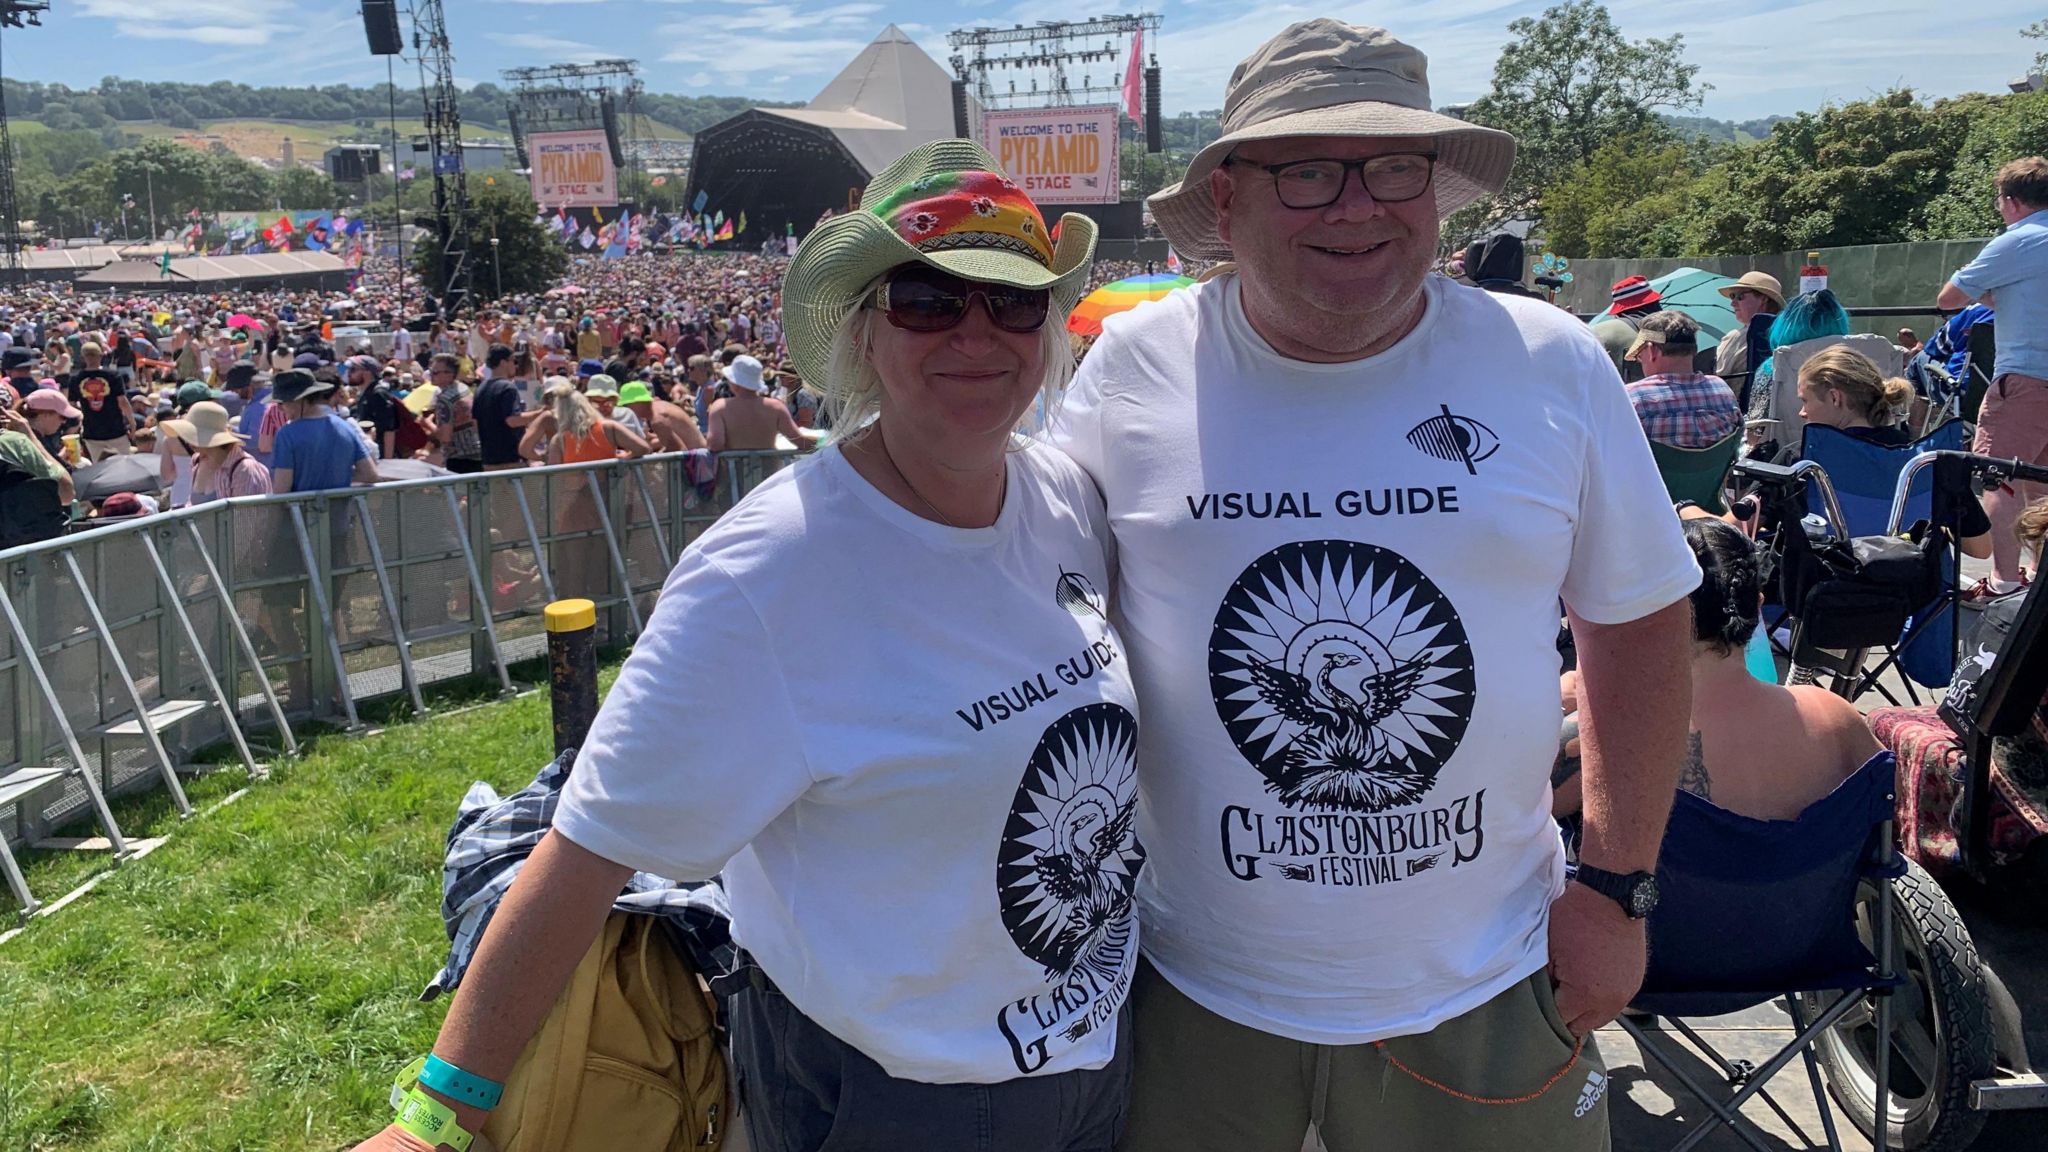 Ms Partington with friend and fellow guide Wyn at the Pyramid Stage at Glastonbury Festival